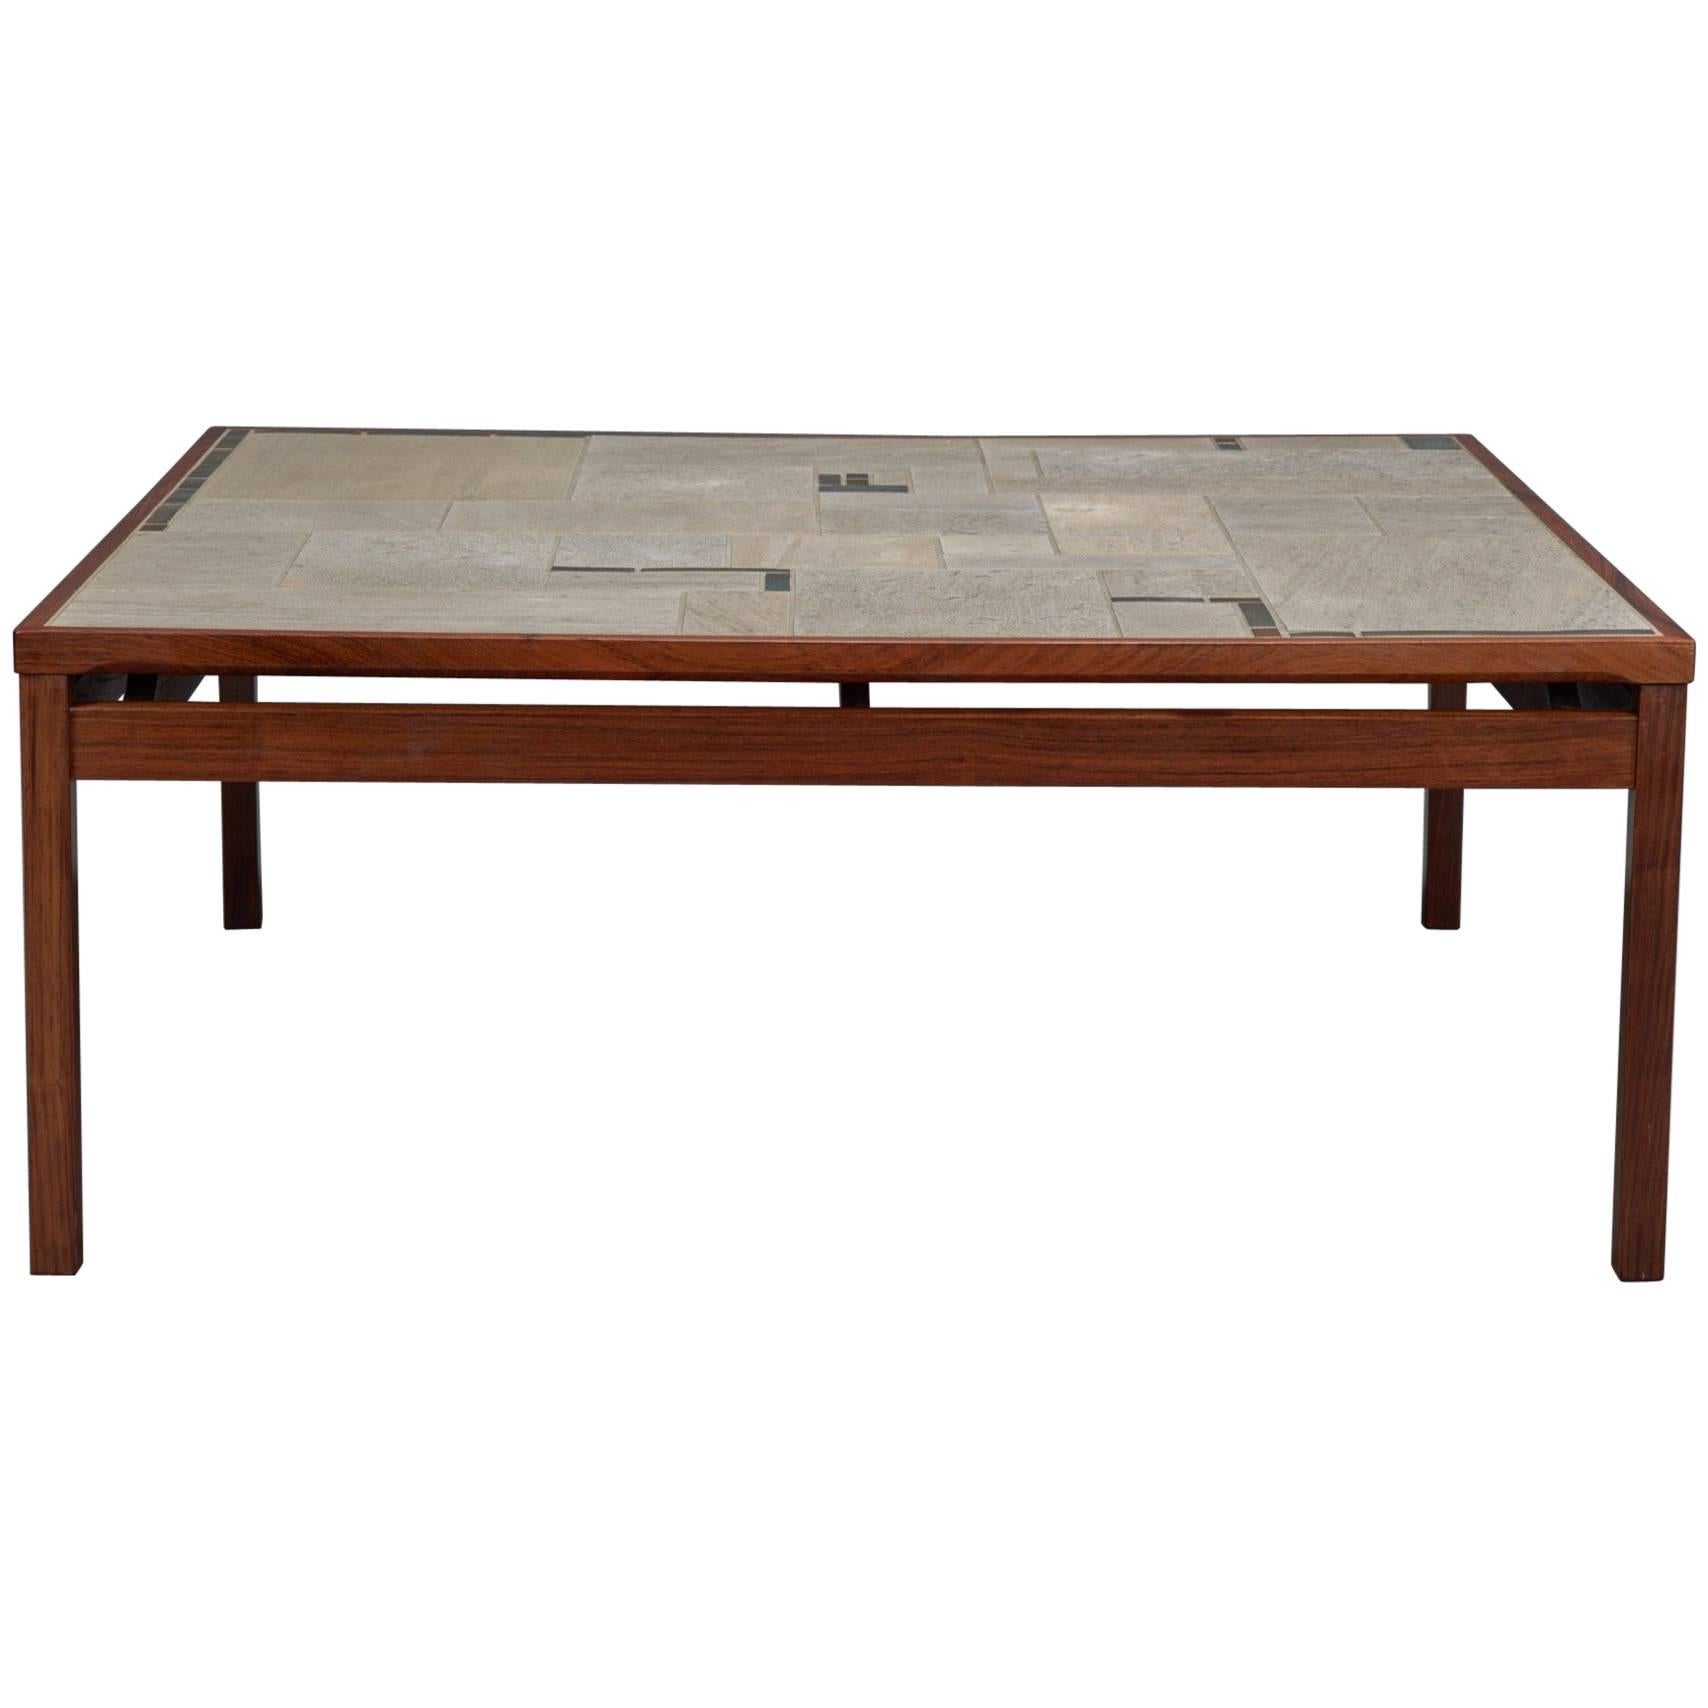 Large Danish Modern Mid-Century Rosewood and Tile Coffee Table